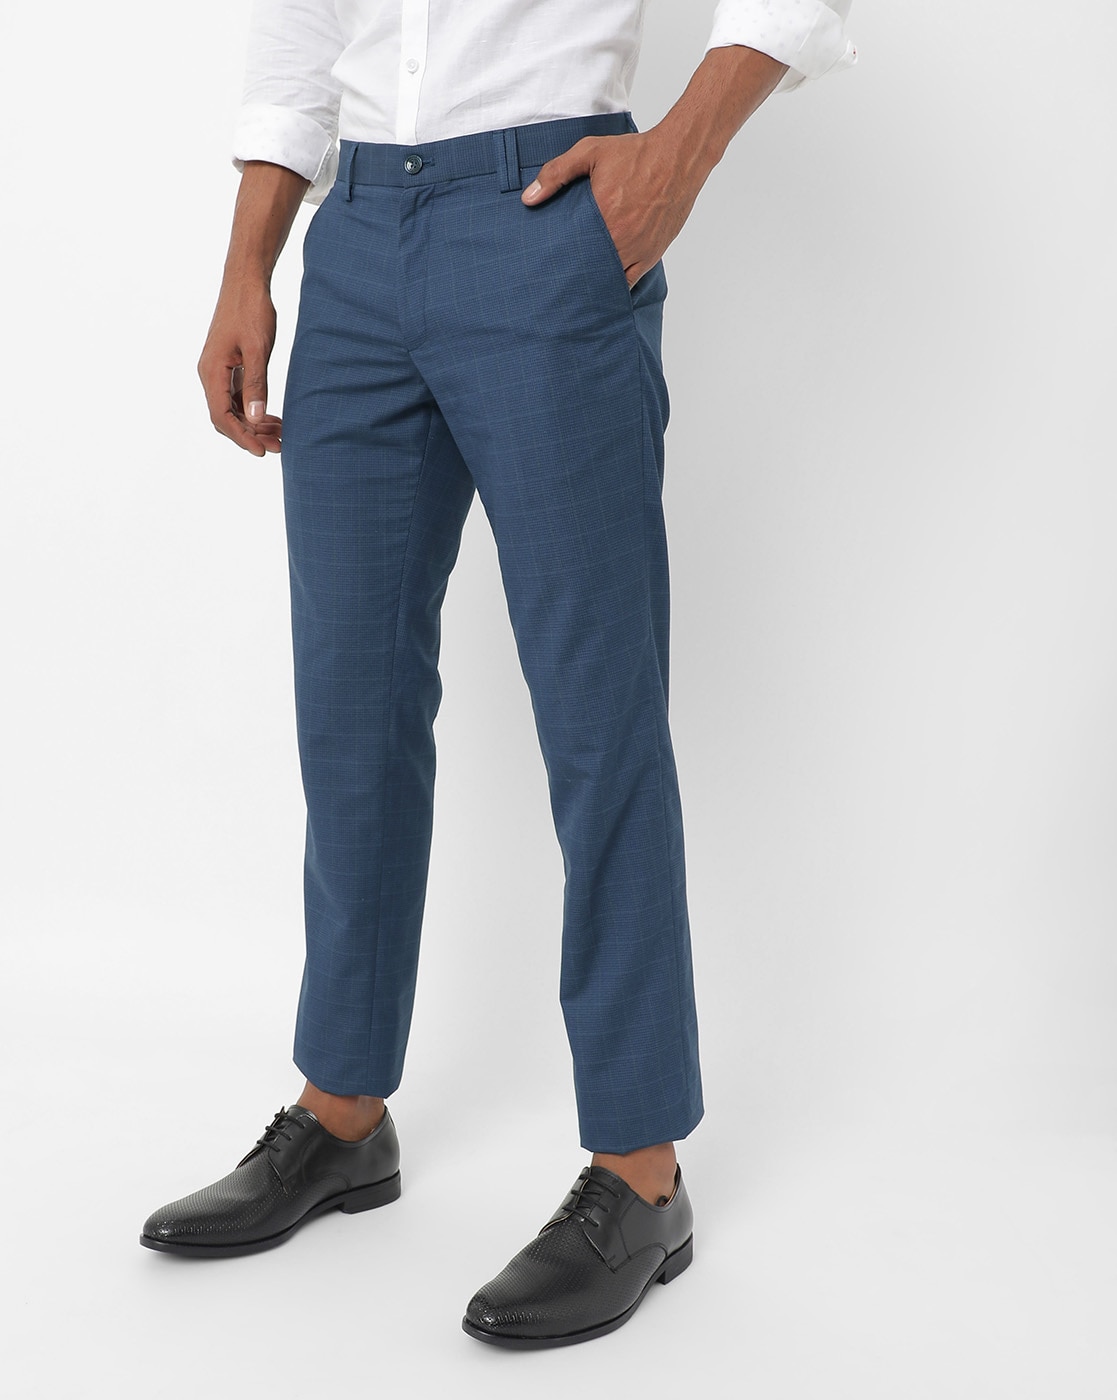 Buy John Players Grey Slim Fit Formal Trousers - Trousers for Men 941170 |  Myntra